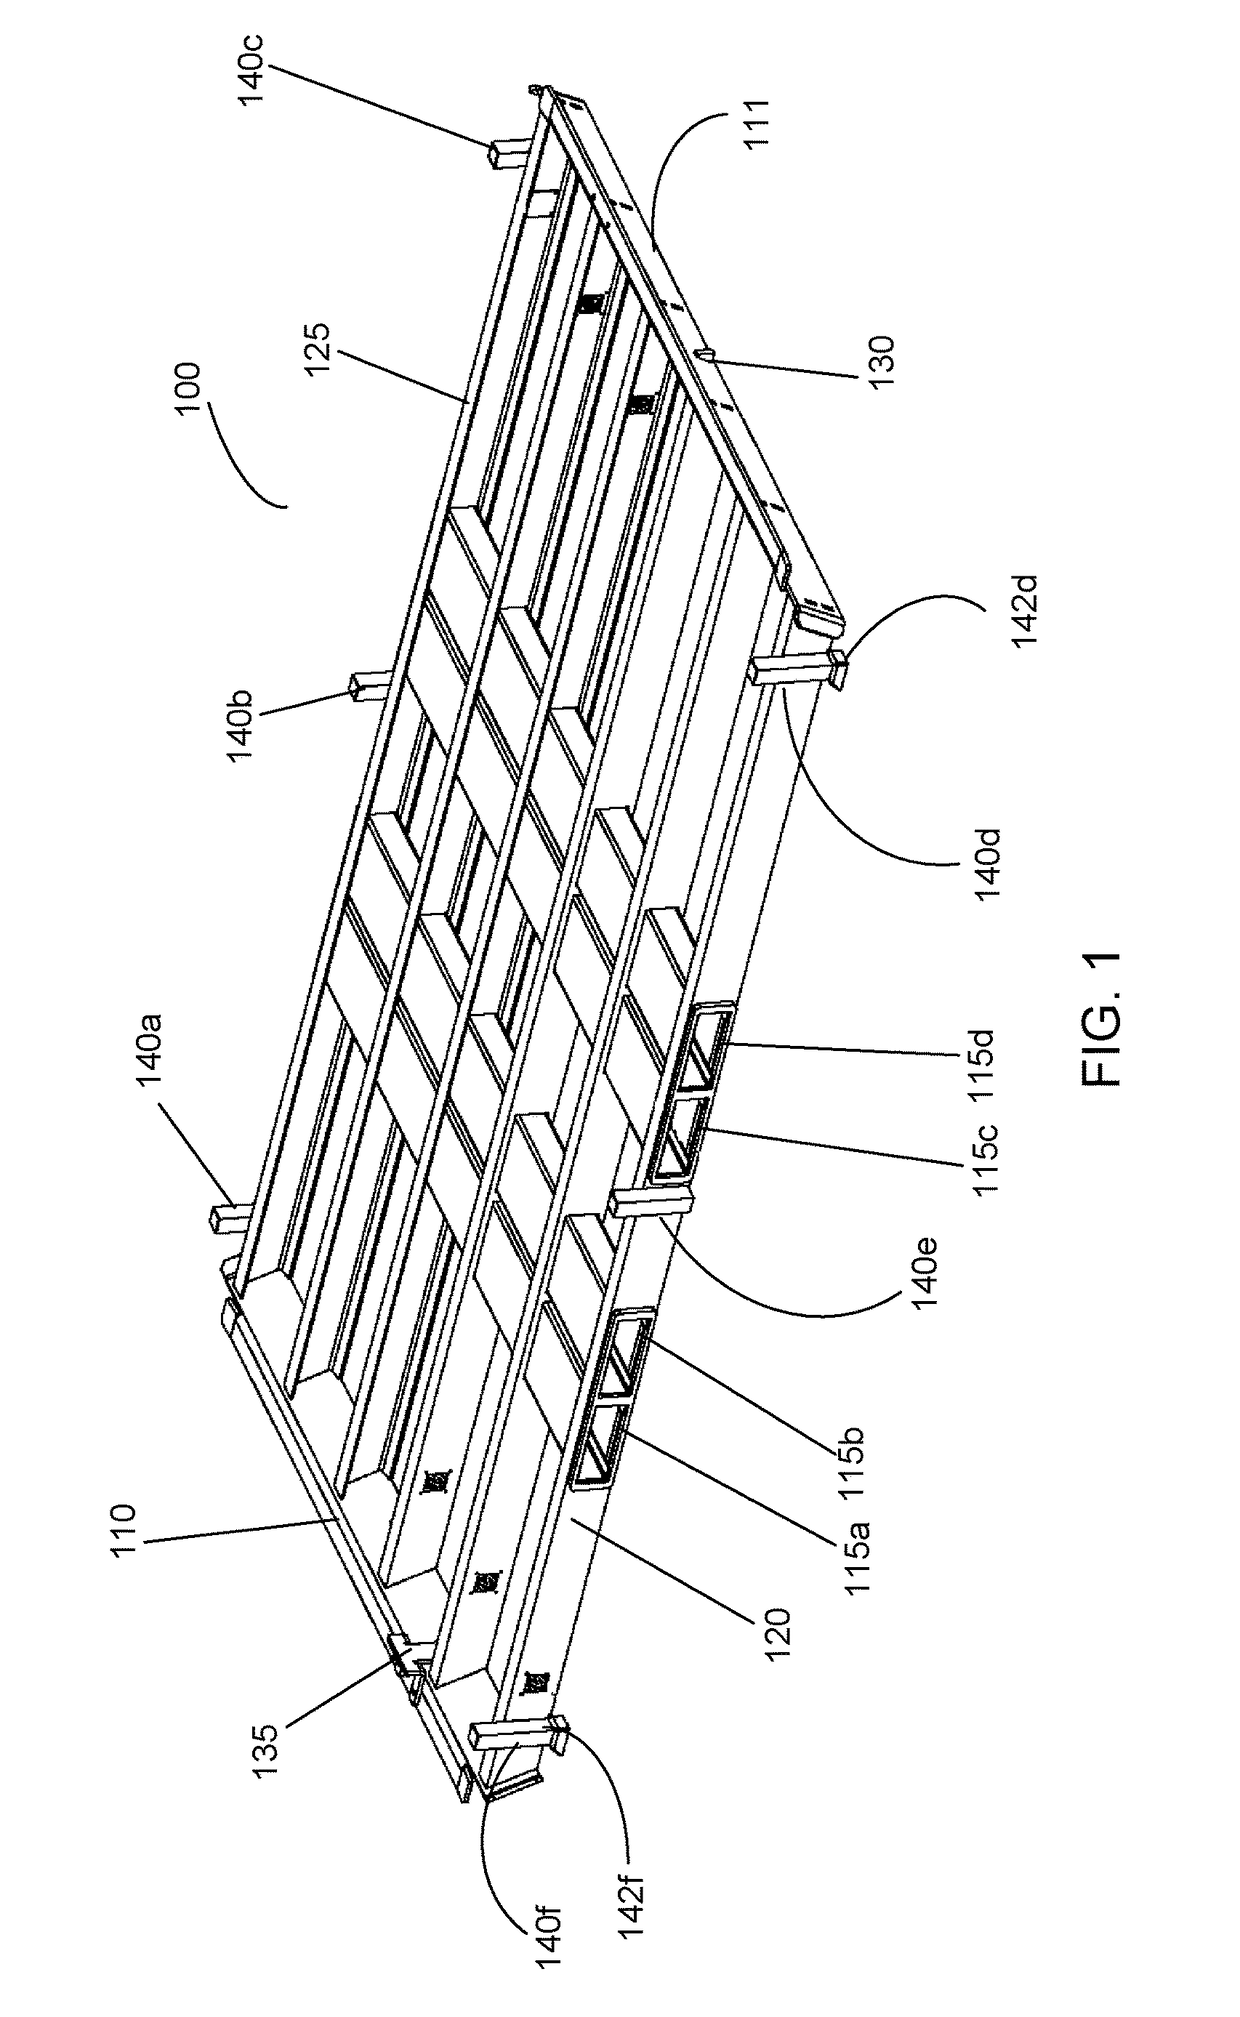 Pallet having posts and stacking bells to allow stacking while loaded with steel sheets